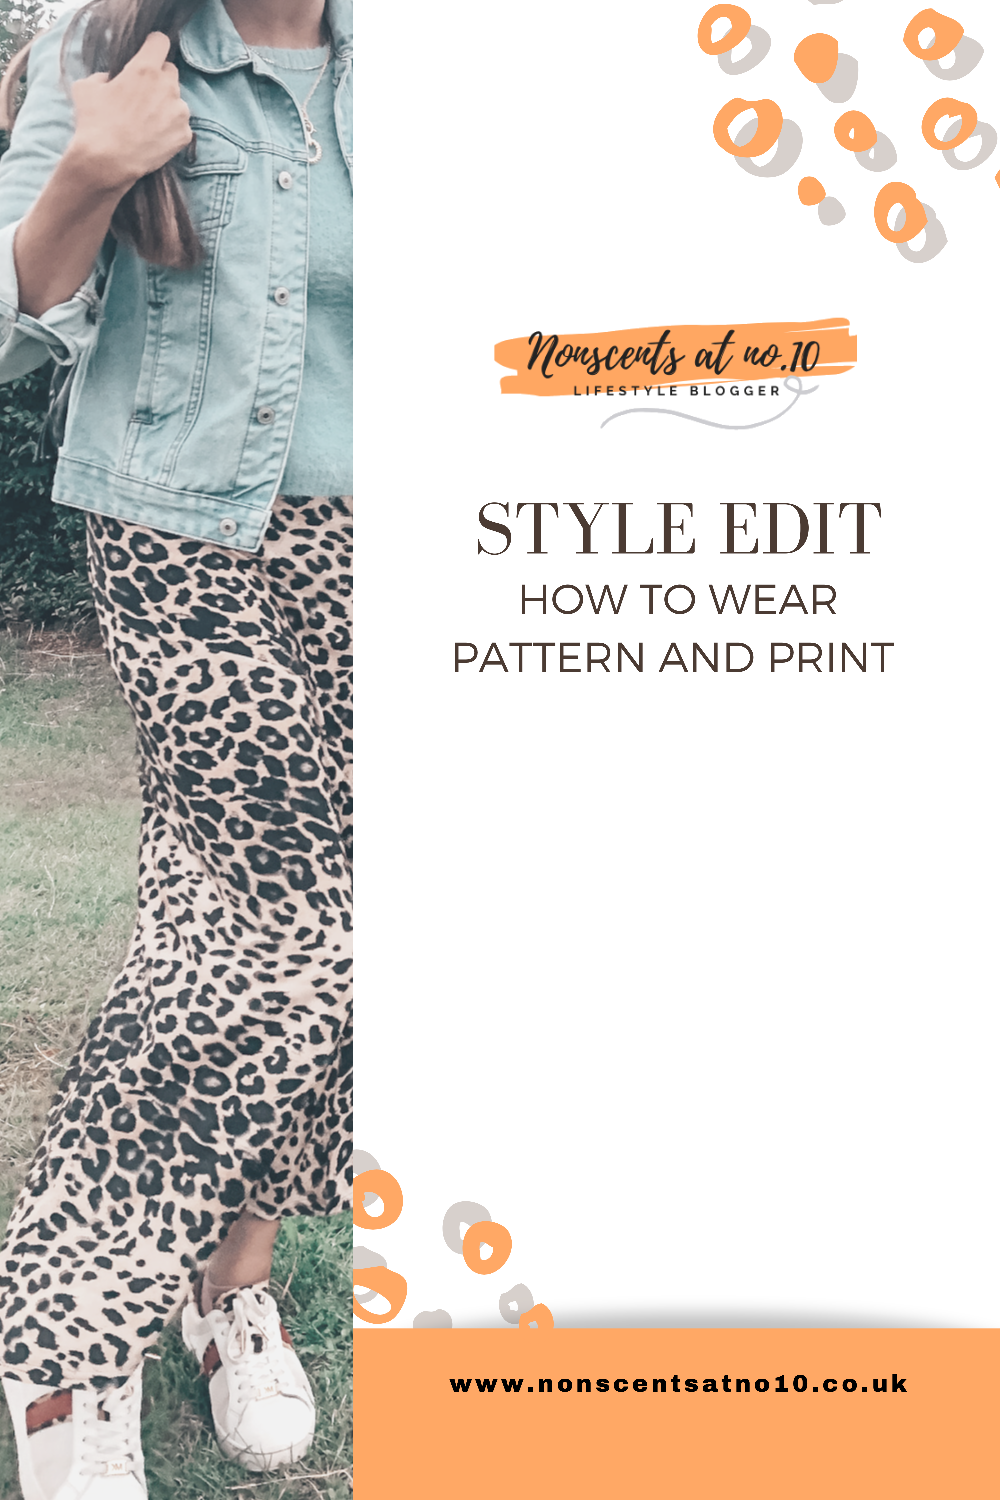 How to wear pattern and print